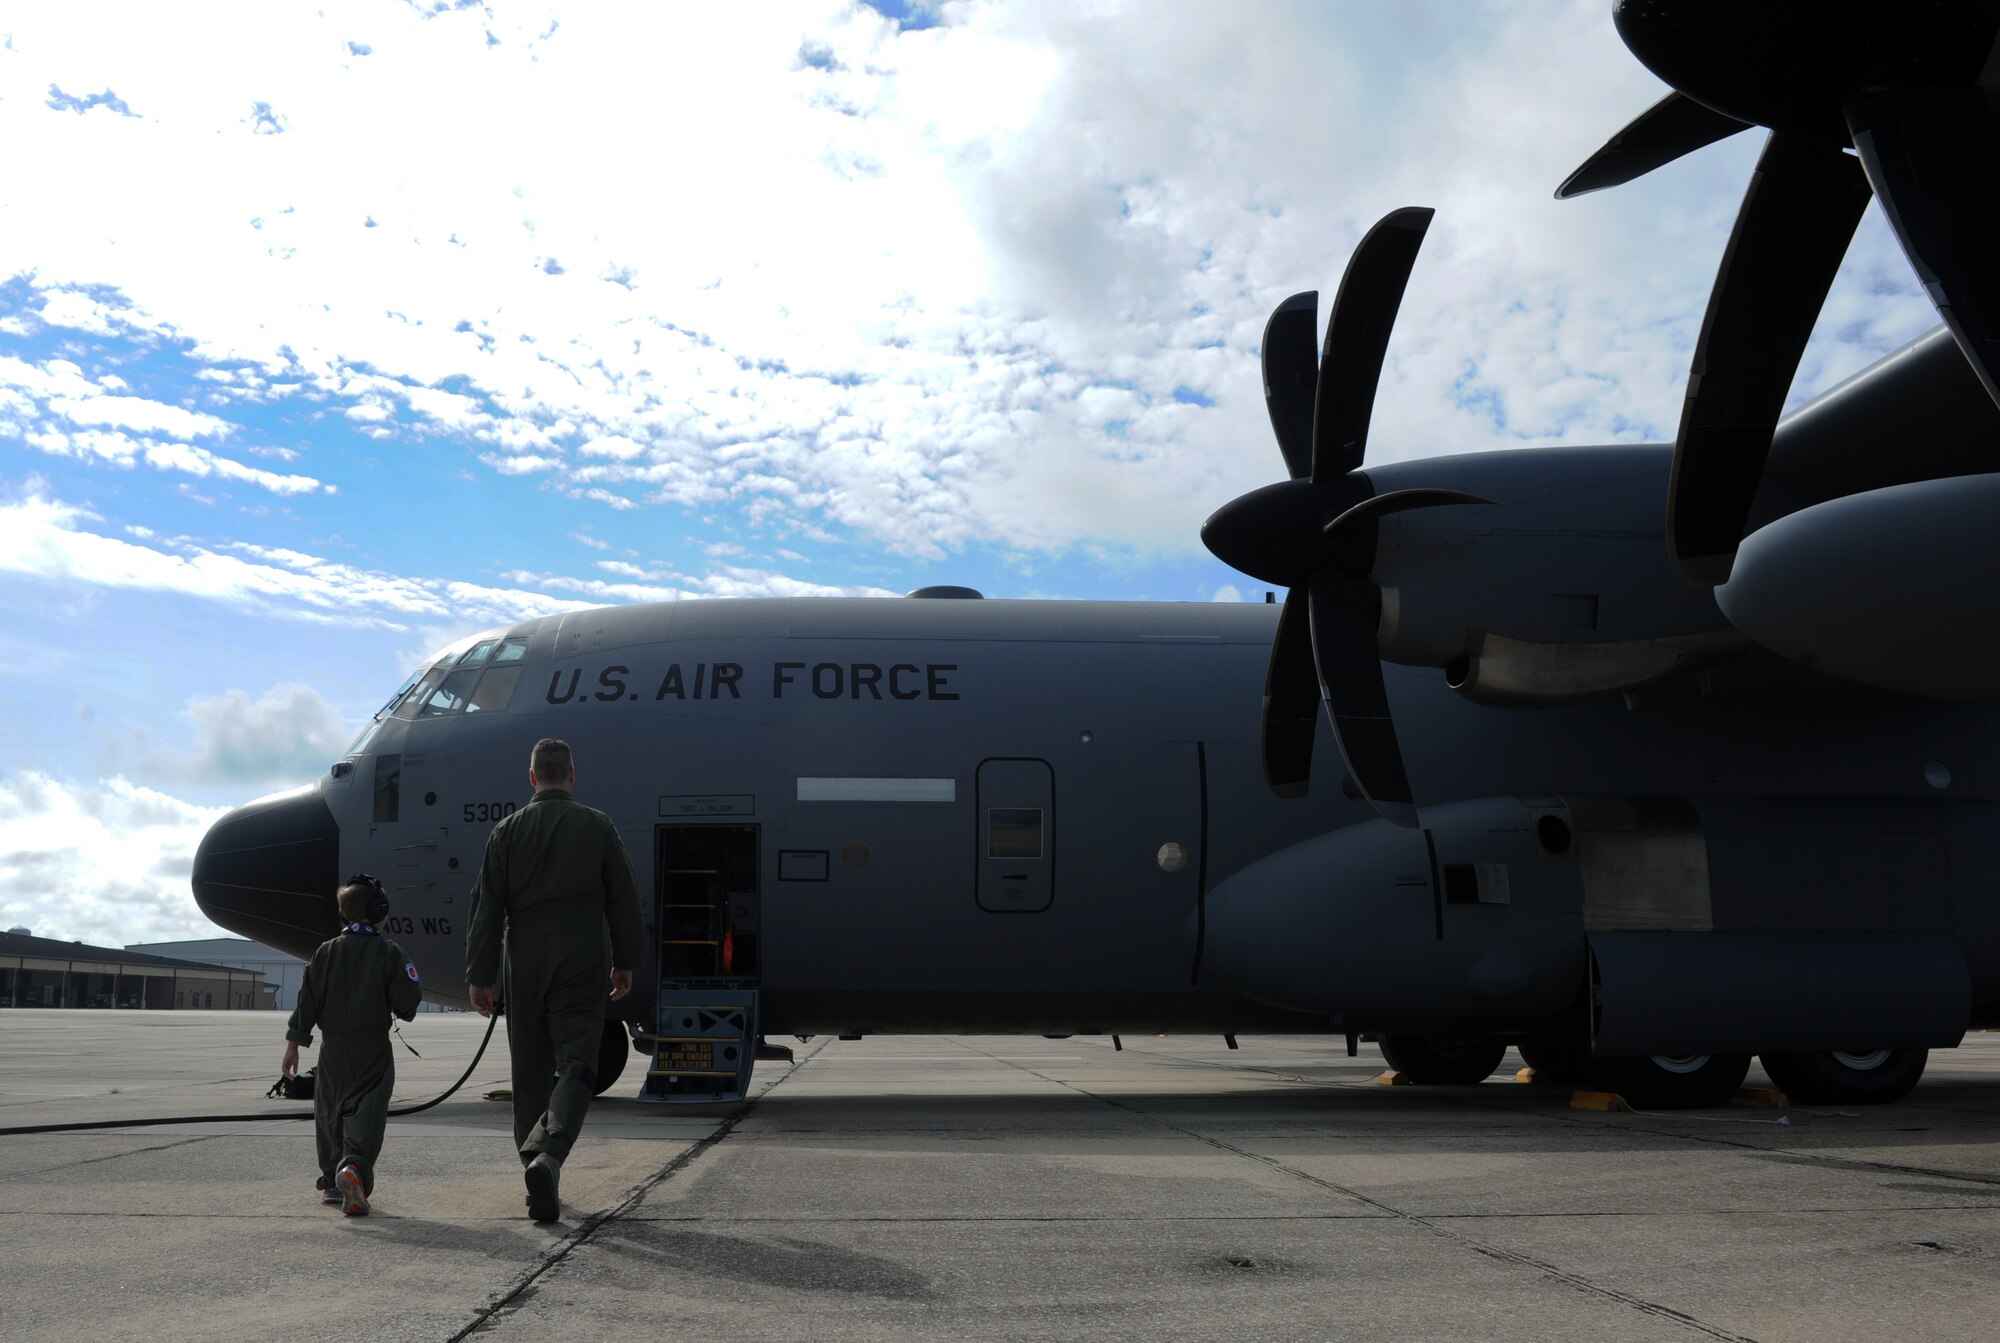 Maj. Jerry Rutland, 403rd Wing chief pilot, escorts Jon Bryant “JB” Orso to a WC-130J Super Hercules during the 403rd Wing’s first Pilot for a Day event April 26, 2016, Keesler Air Force Base, Miss. Orso, who served as an honorary Air Force Reserve second lieutenant, is in remission after receiving treatment for Acute Lymphoblastic Leukemia. Pilot for a Day is a community outreach program for children who live with a chronic or life-threatening disease or illness. (U.S. Air Force photo by Kemberly Groue)